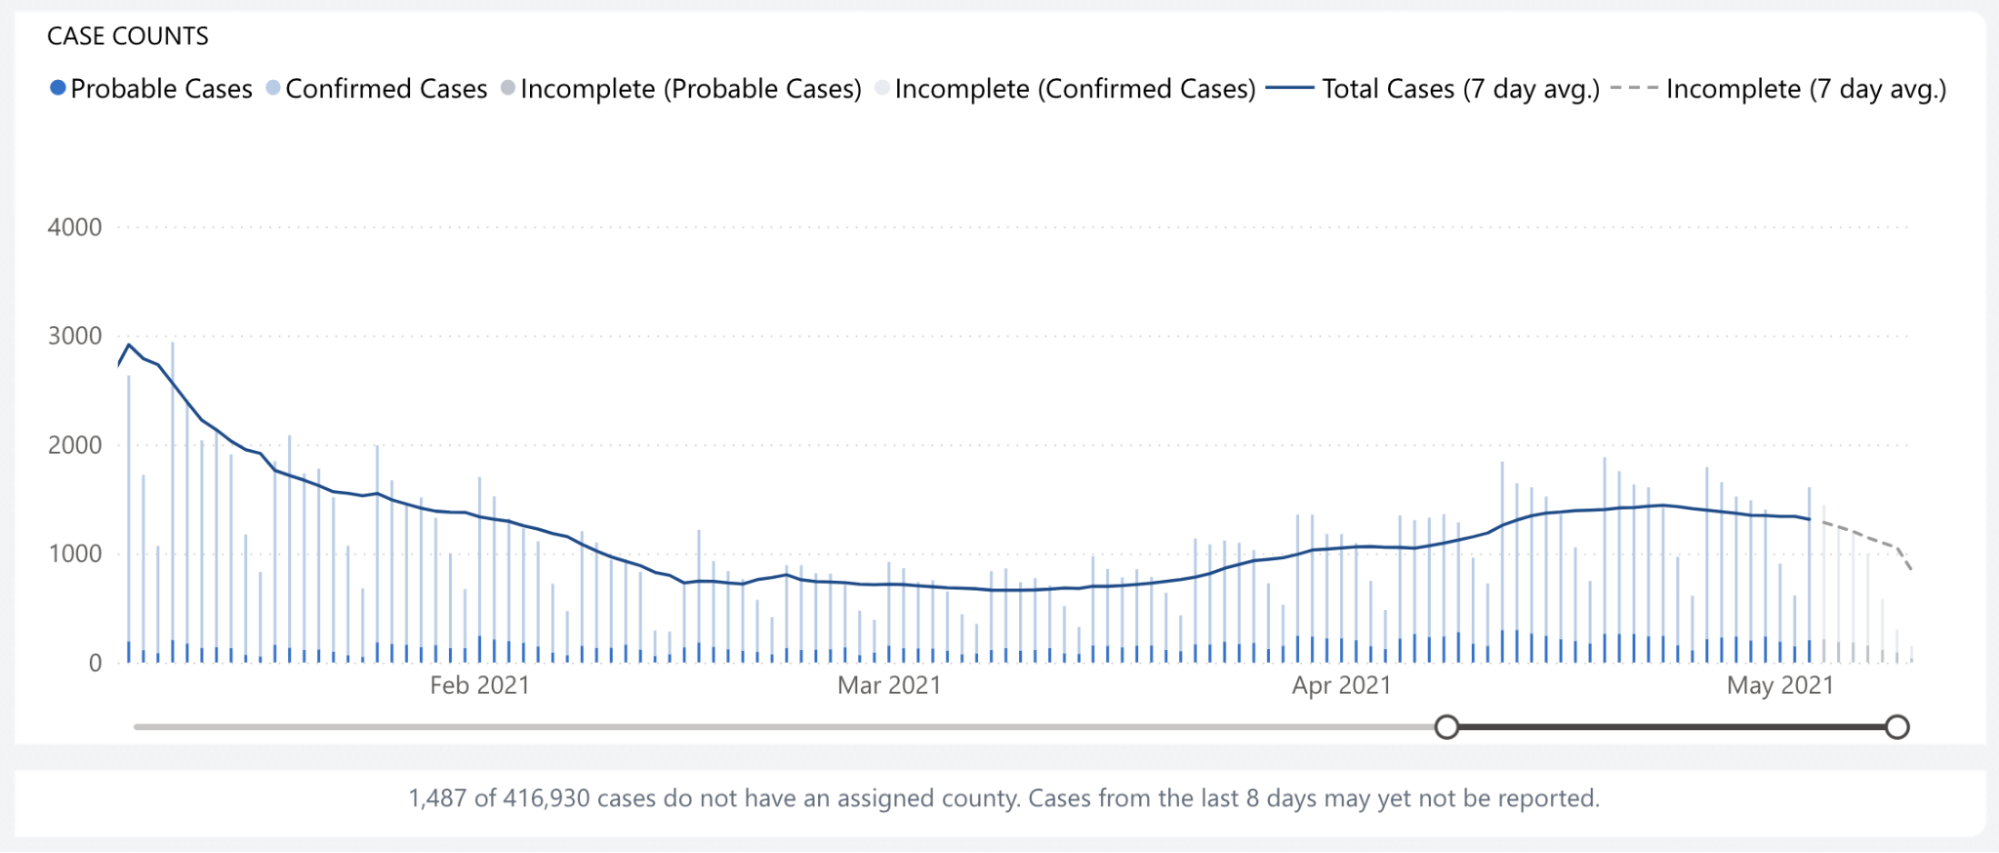 Screenshot of a chart from the Washington State COVID-19 dashboard showing data from January through May 2021. The last several days of the chart show a steep decline in cases, but are also colored gray to indicate incomplete data, which the previous days are colored blue.